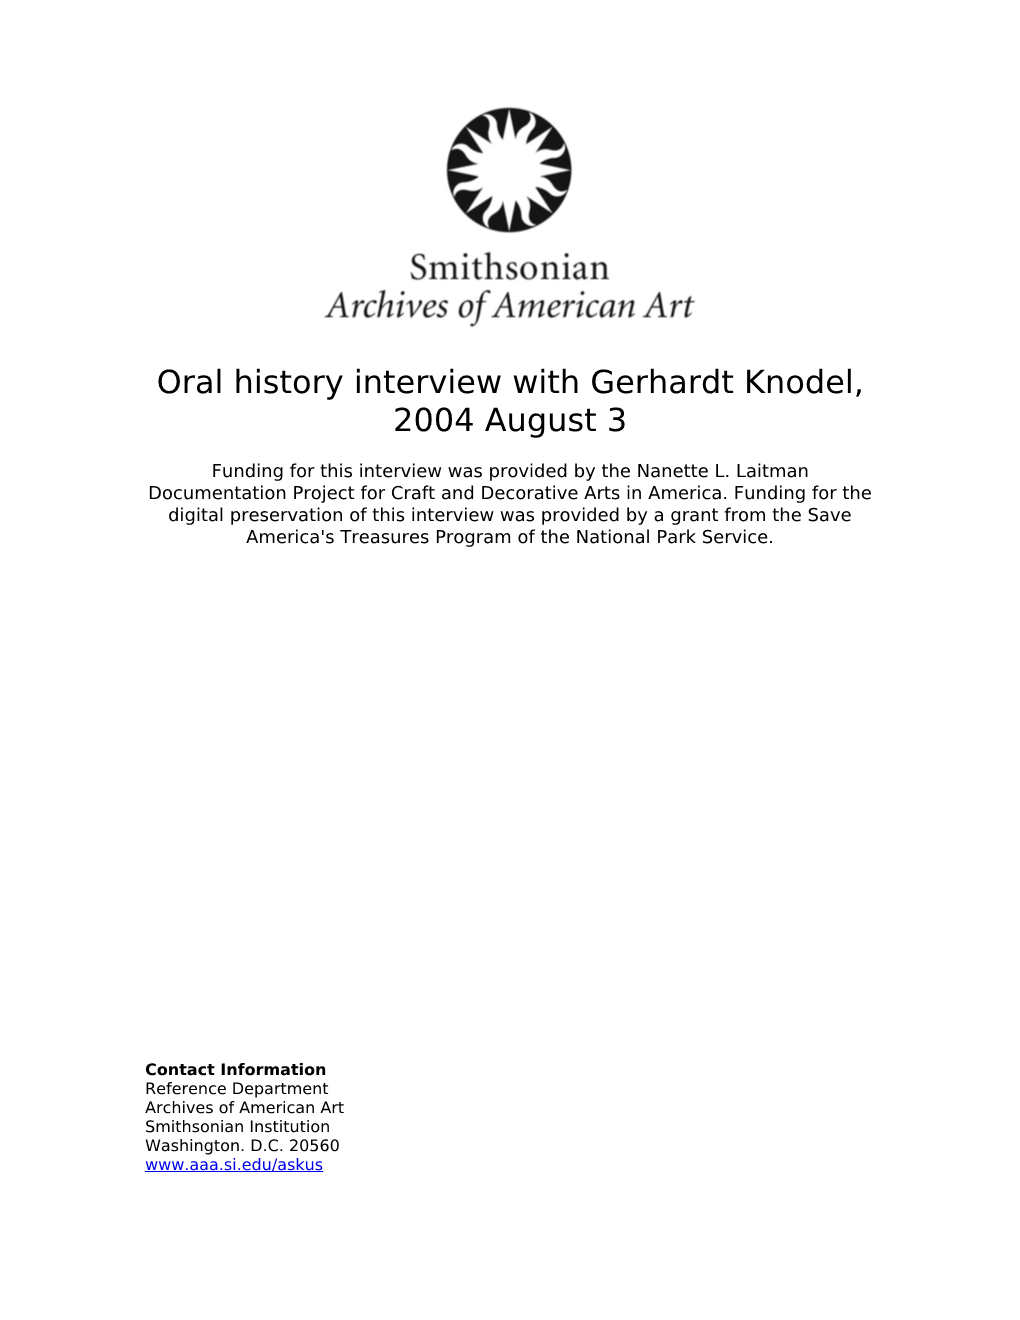 Oral History Interview with Gerhardt Knodel, 2004 August 3